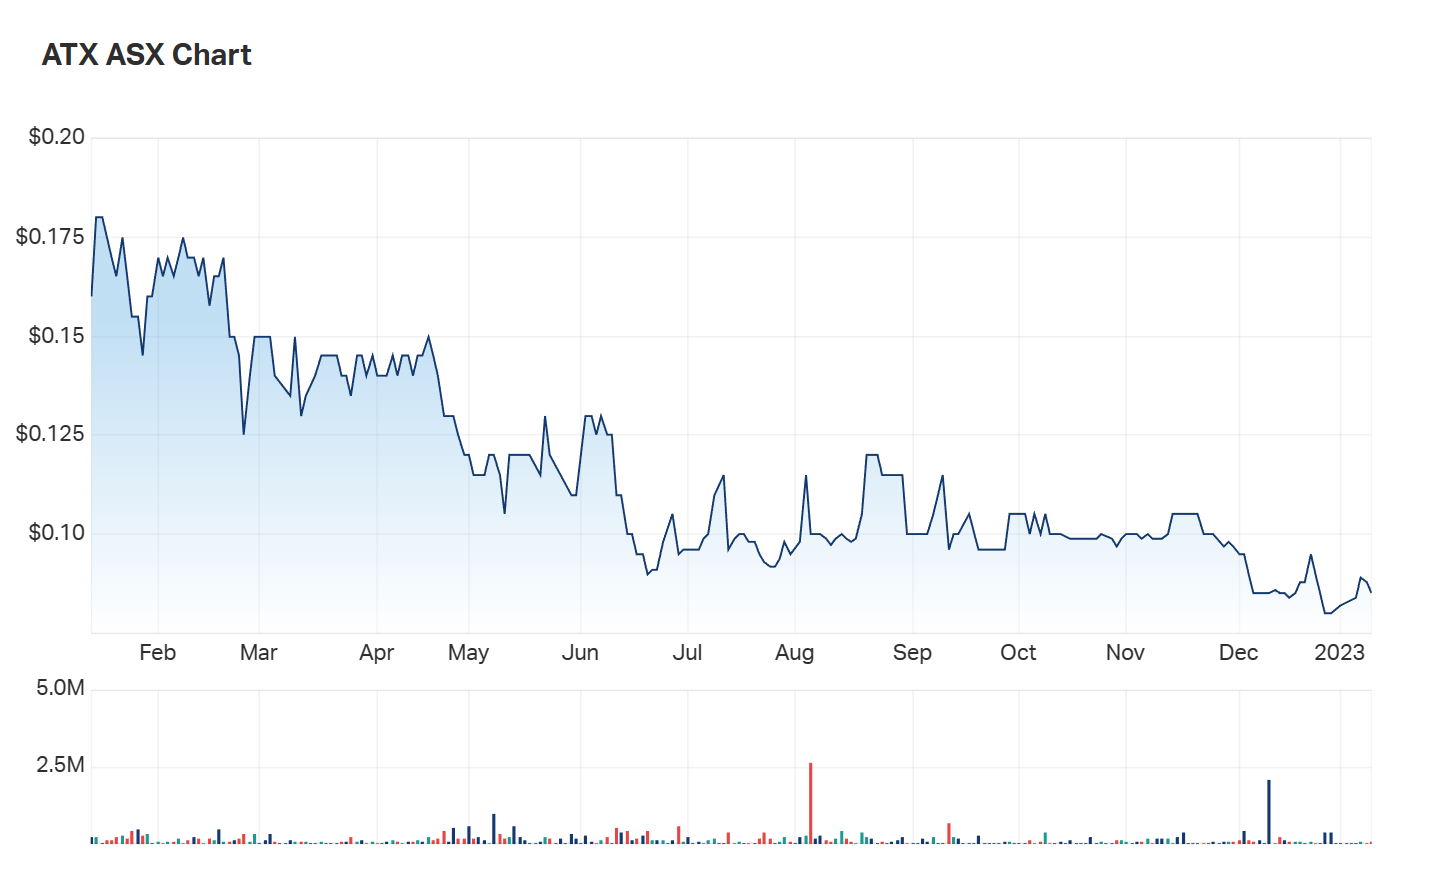 A look at Amplia's one year charts show the toll 2022 took on the healthcare smallcap